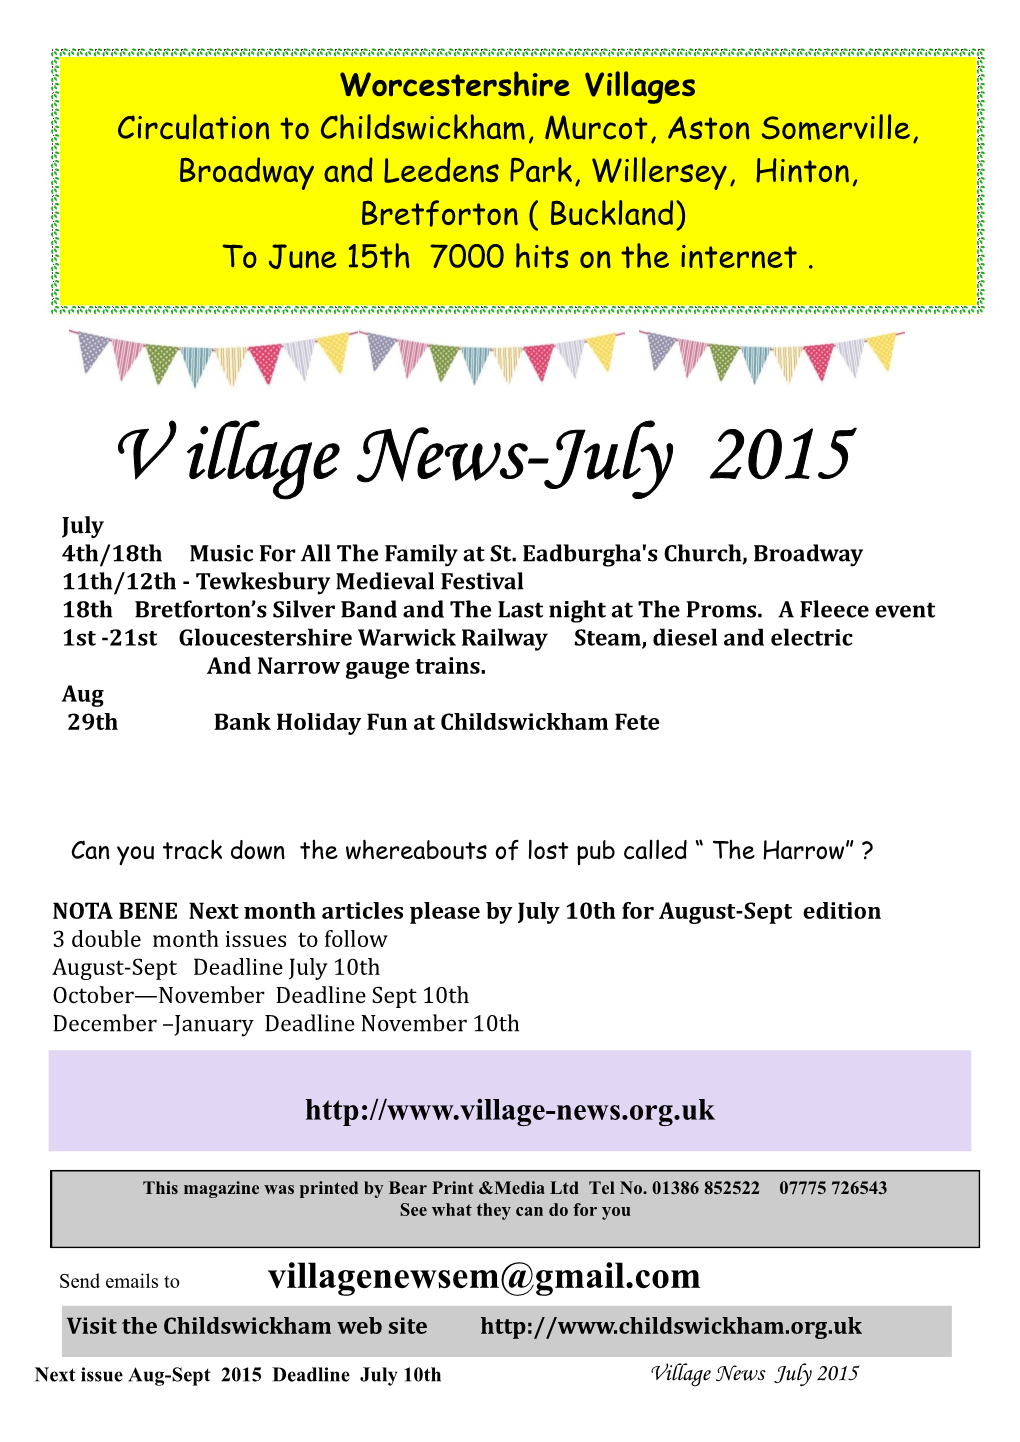 V Illage News-July 2015 July 4Th/18Th Music for All the Family at St